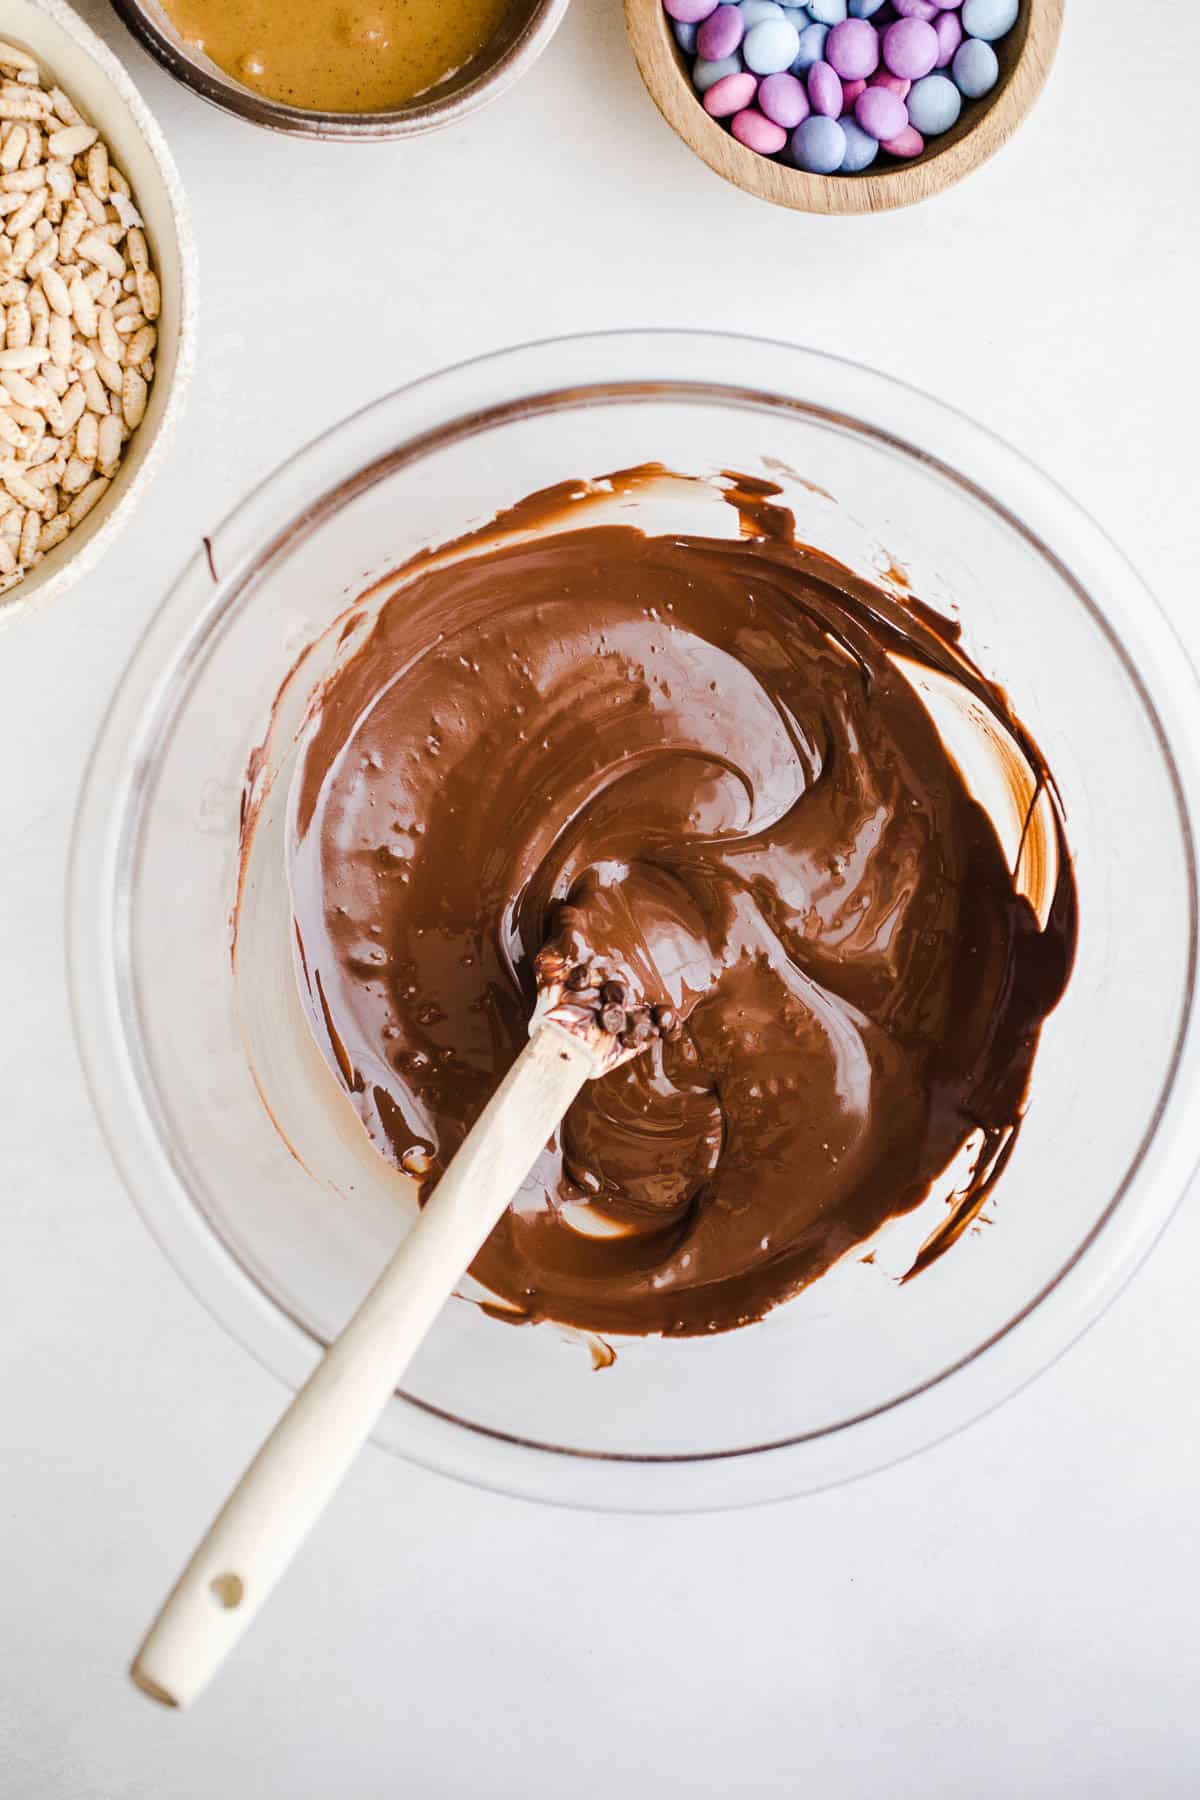 Melted chocolate in a glass bowl with a spatula.